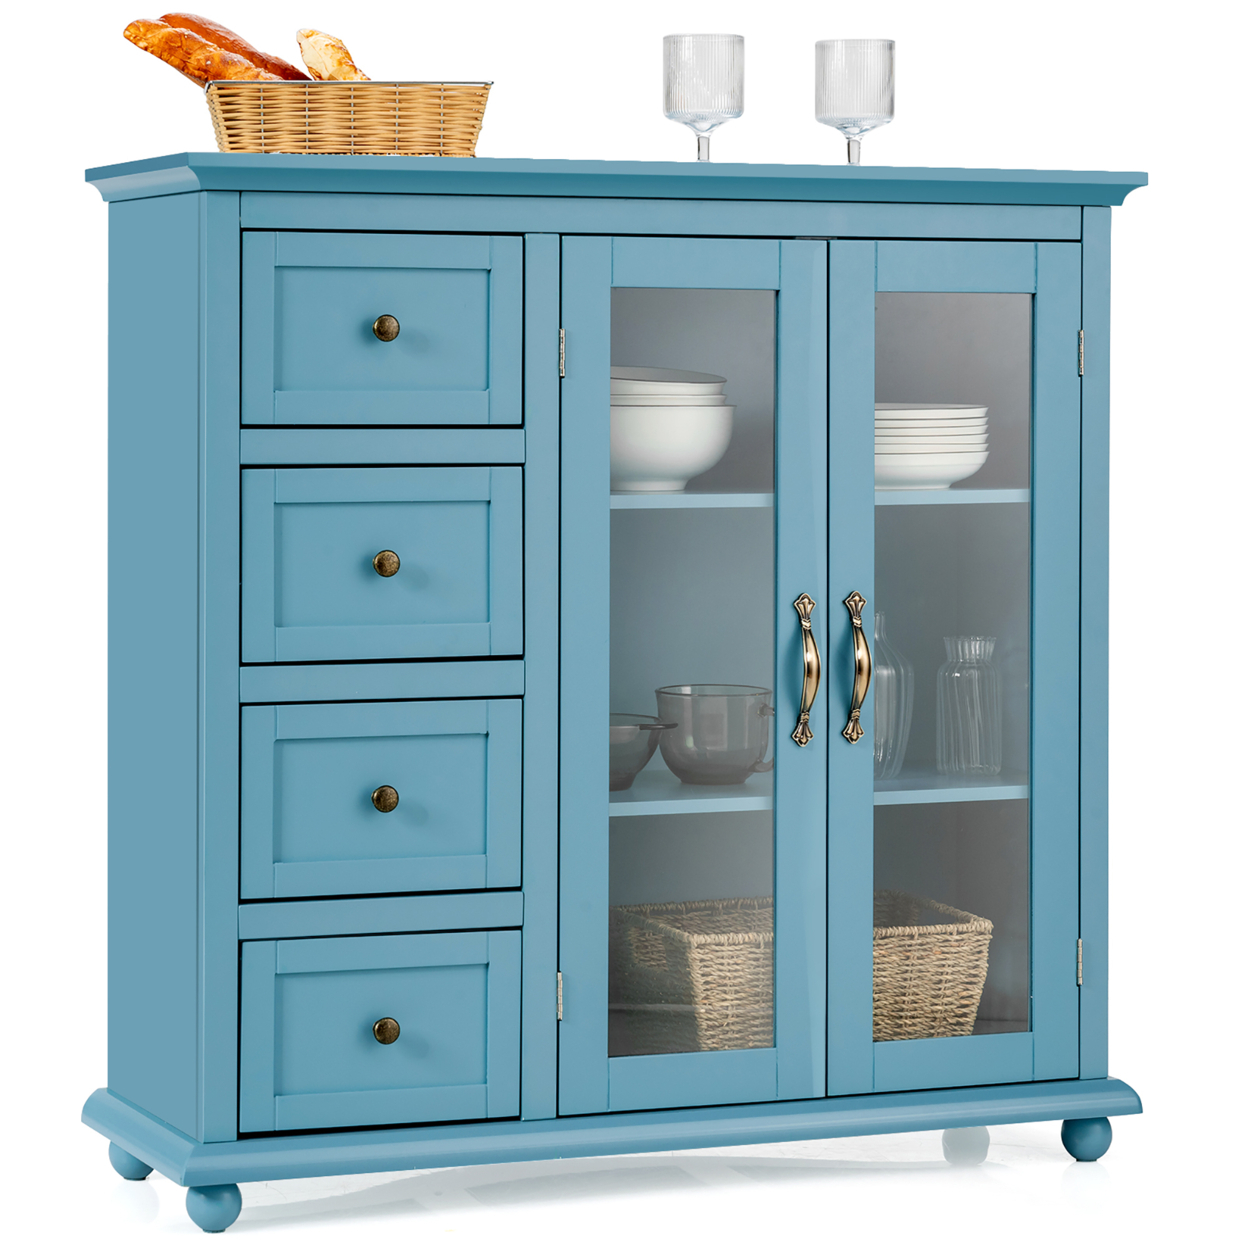  Buffet Sideboard Table Kitchen Storage Cabinet With Drawers And Doors for Simple Design